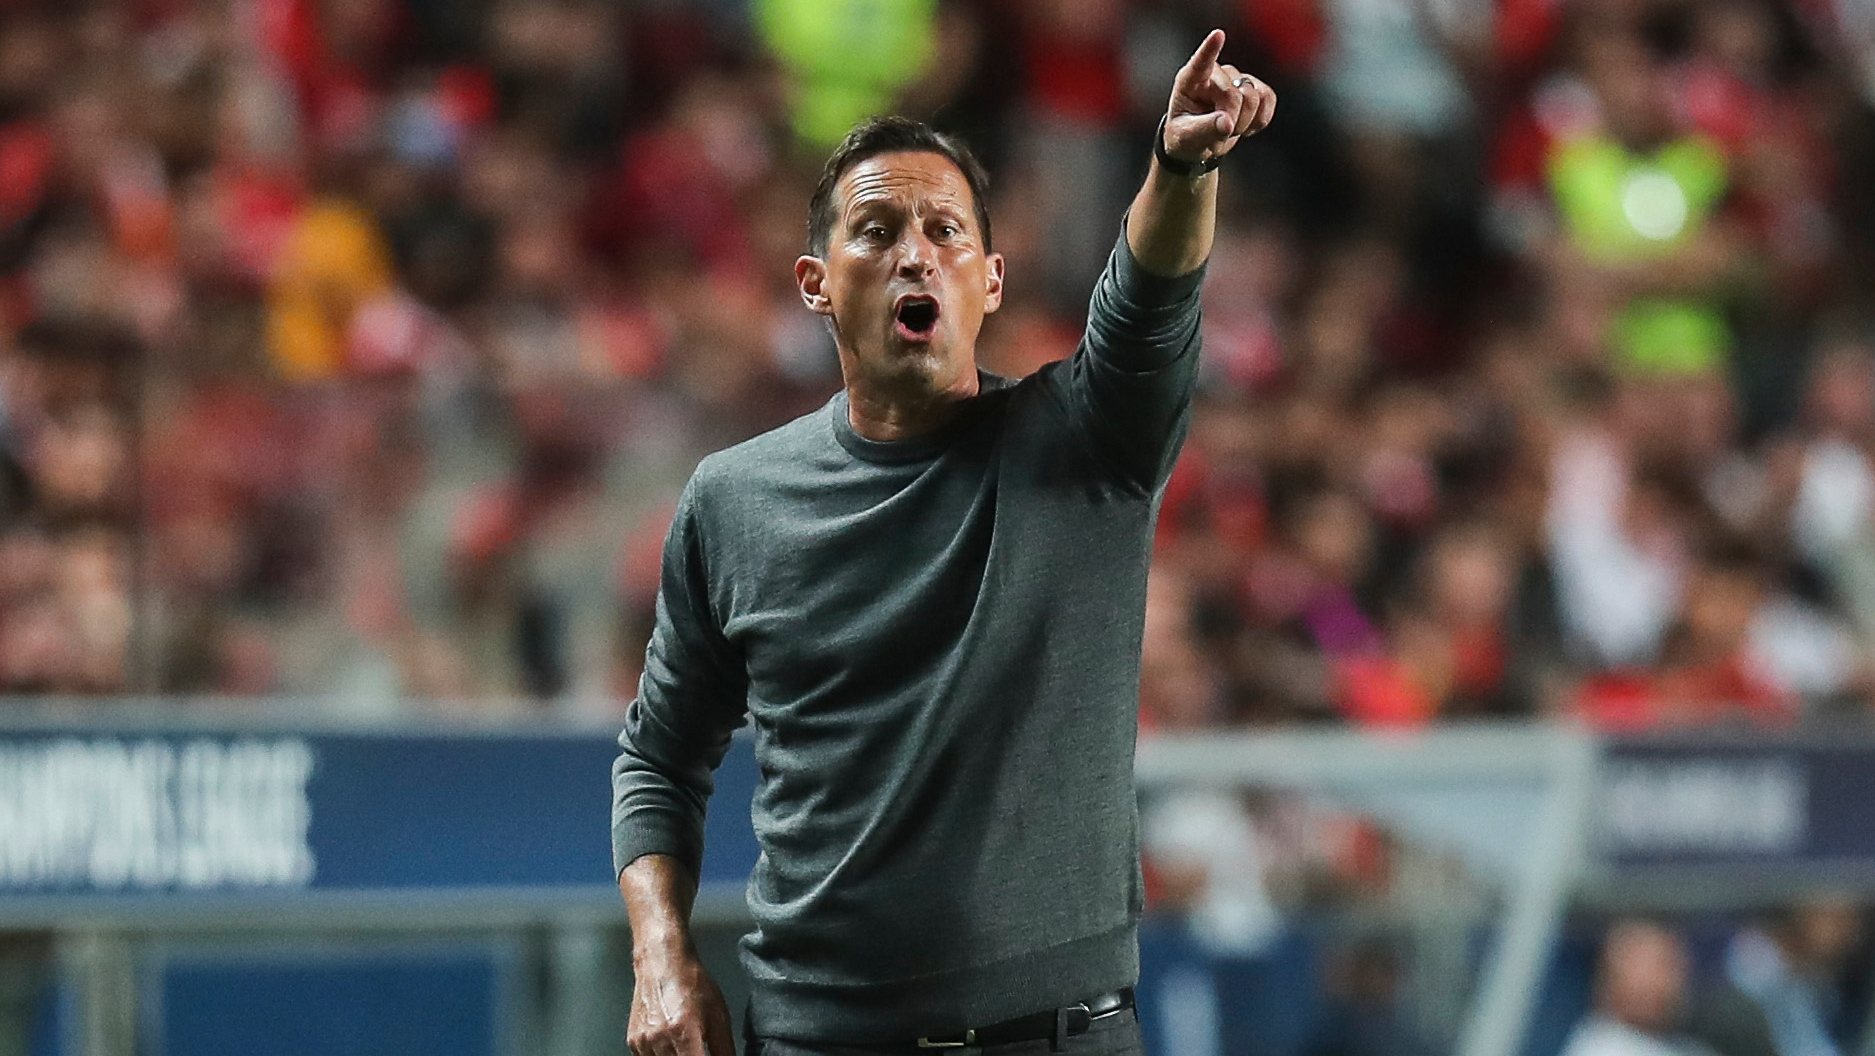 Benfica head coach Roger Schmidt reacts during the UEFA Champions League Group H match with Paris Saint-Germain at Luz Stadium in Lisbon, Portugal, 5 of October 2022. MIGUEL A. LOPES/LUSA